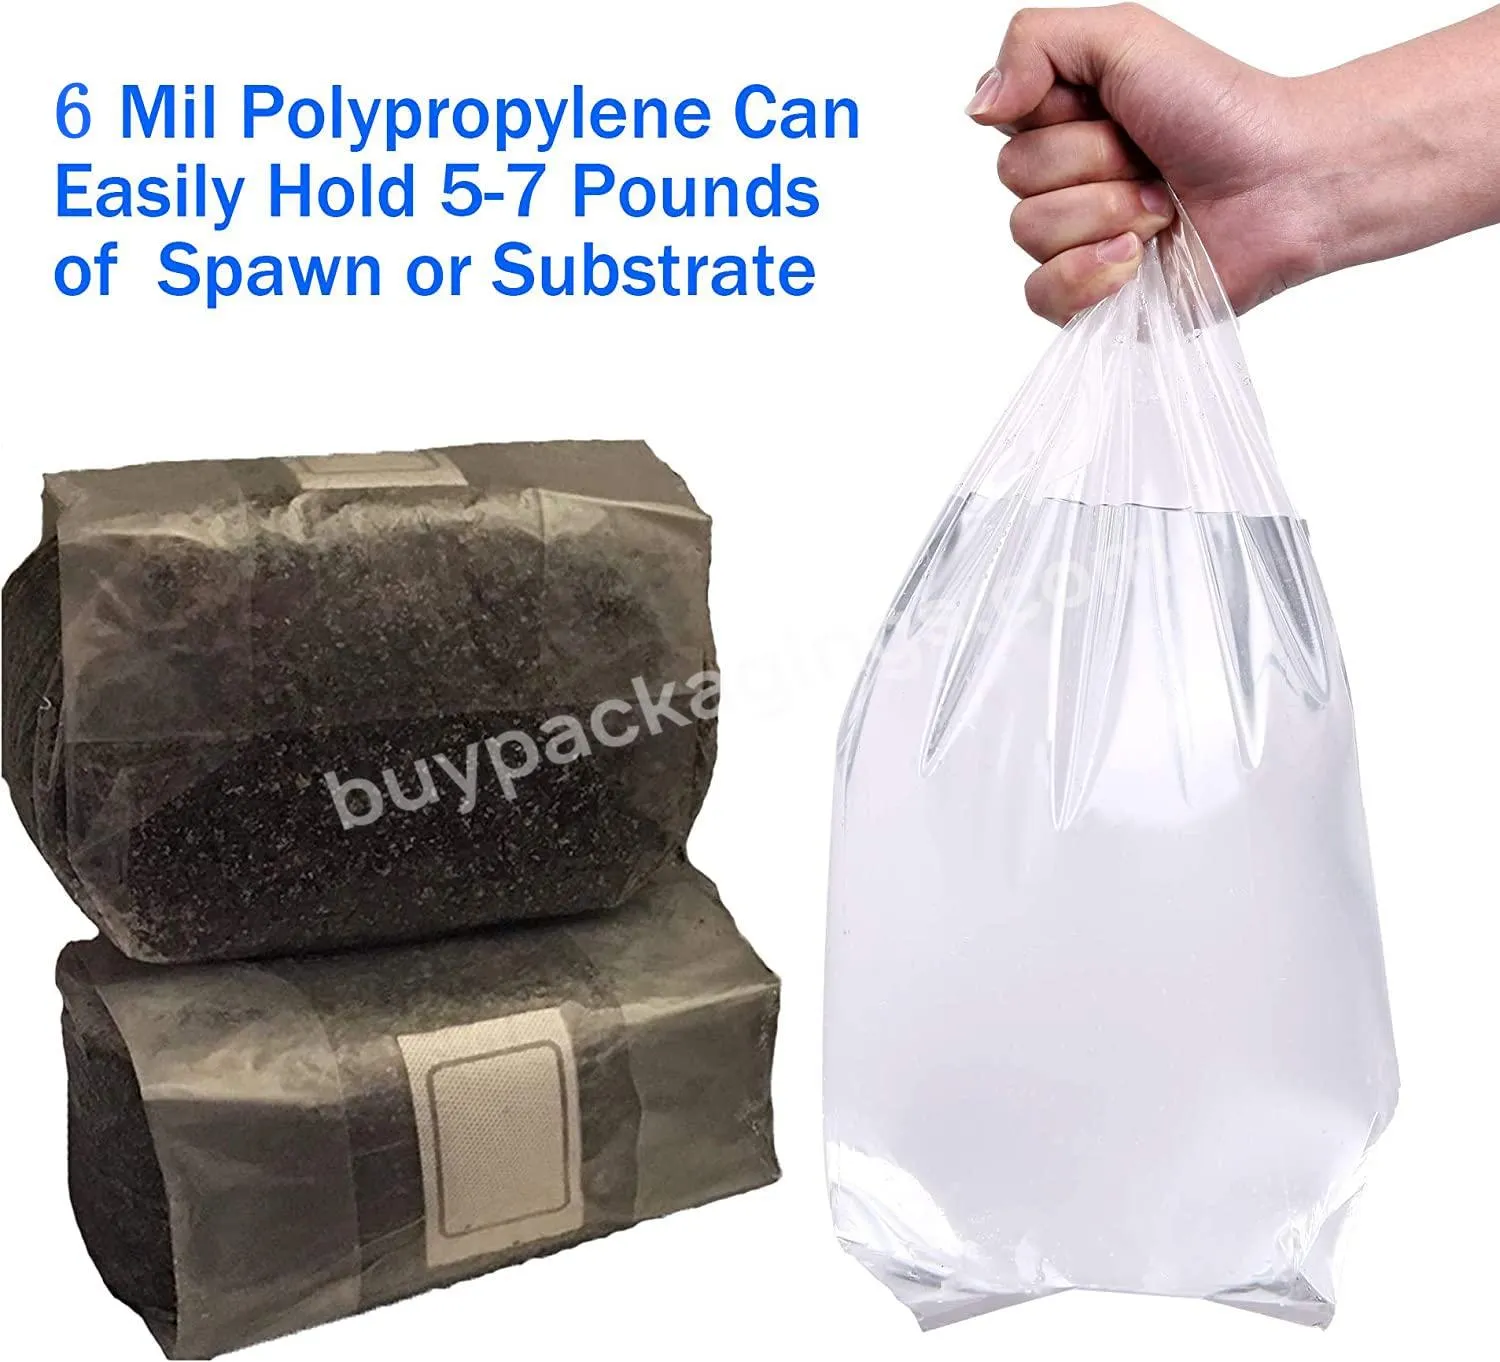 Pp Cultivation Mushroom Plastic Poly Growing Spawn Packaging Bags 0.2 Micron Filter Mycobag Bag - Buy Mushroom Grow Bags Spawn Myco Bag,Mushroom Growing Bag Packaging Bags 0.2 Micron Filter Mycobag Bag,Large Breathable Spawn Mushroom Plastic Poly Gro